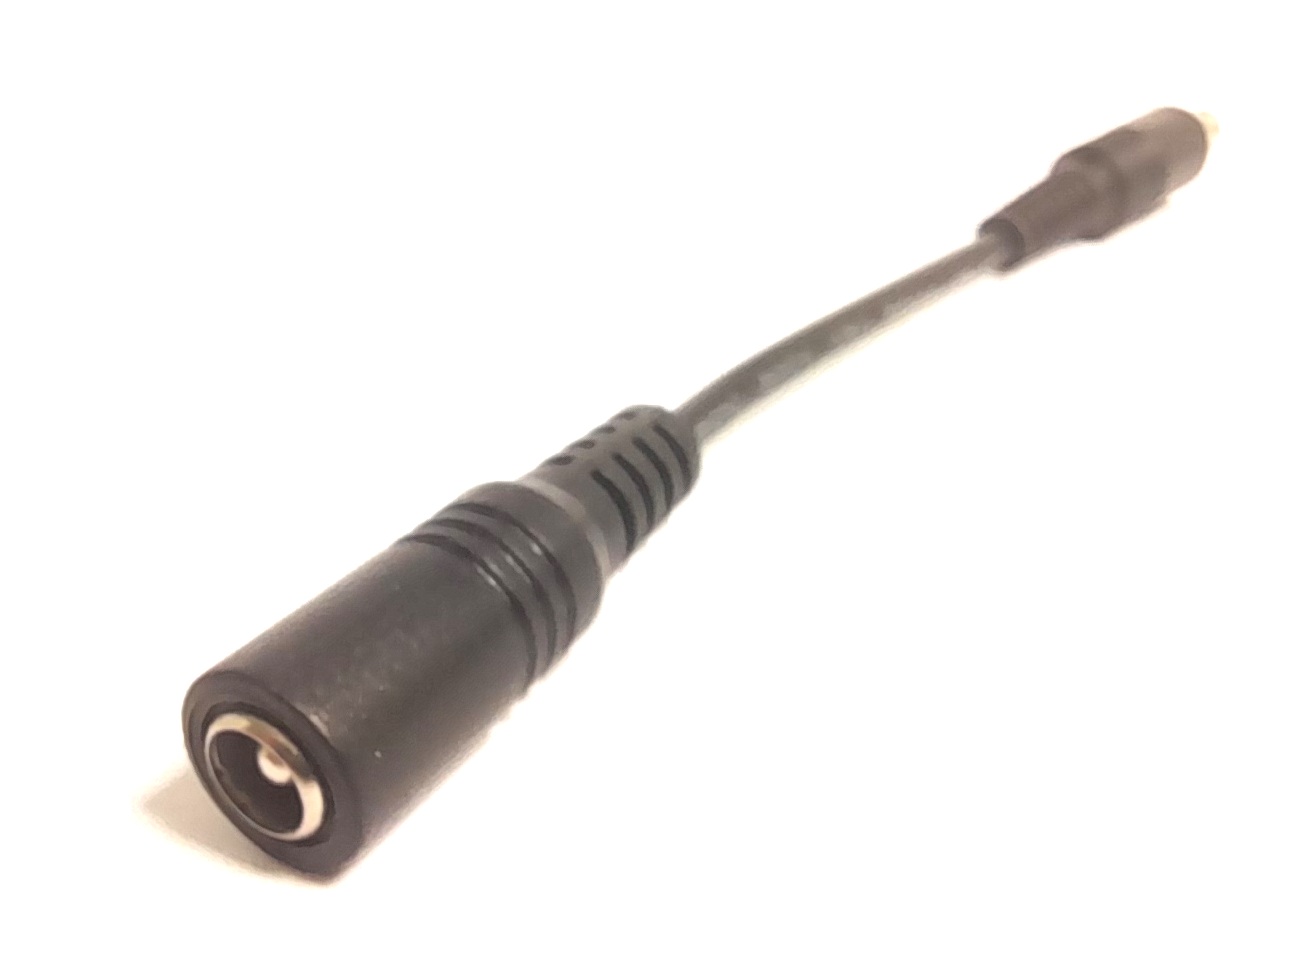 Adapter Cable from DC 5.5 x 2.5 mm to Vanmoof S3 / X3